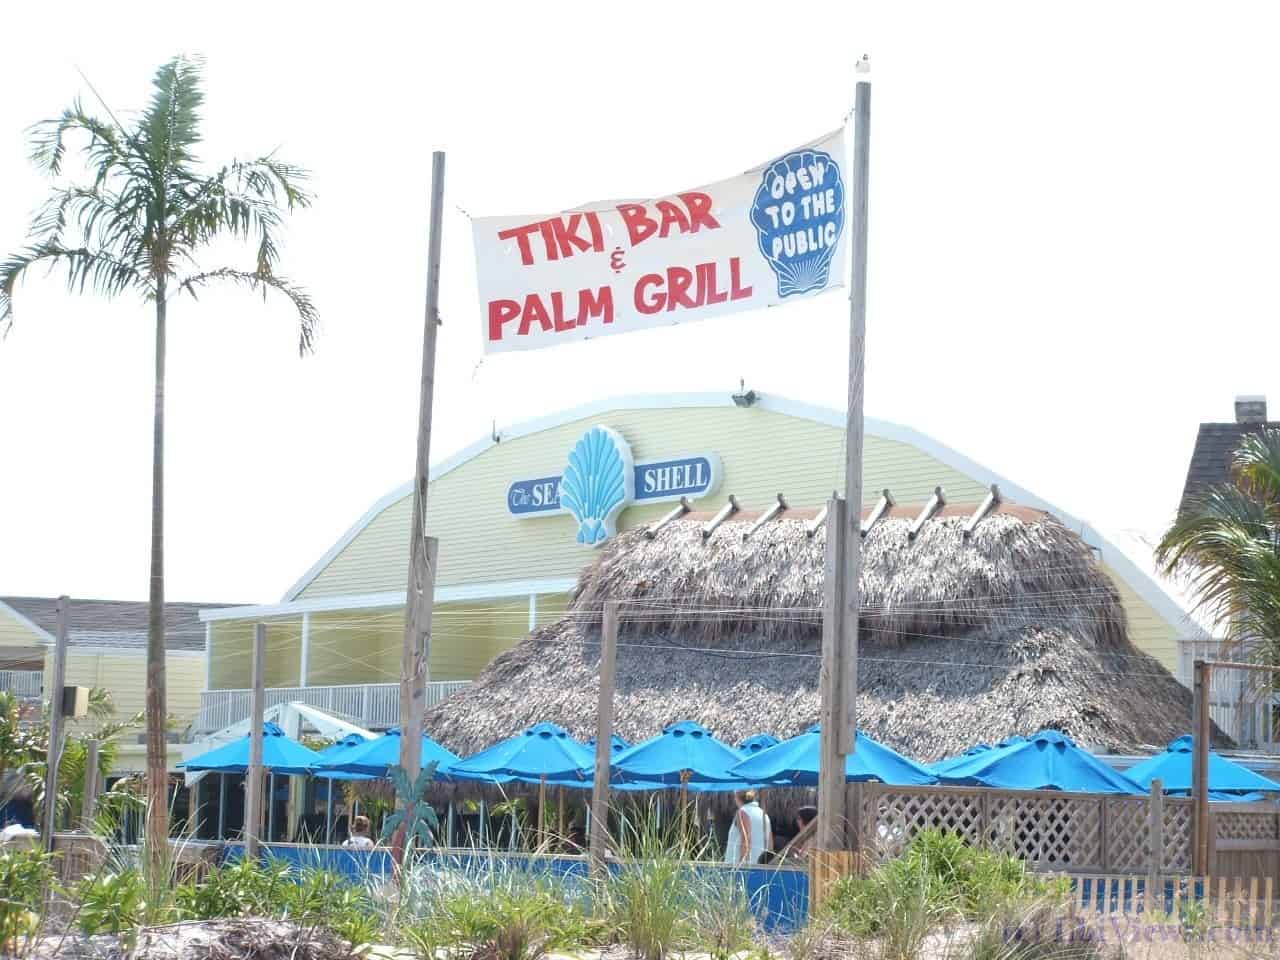 The Tiki Bar and Palm Grill at the Seashell